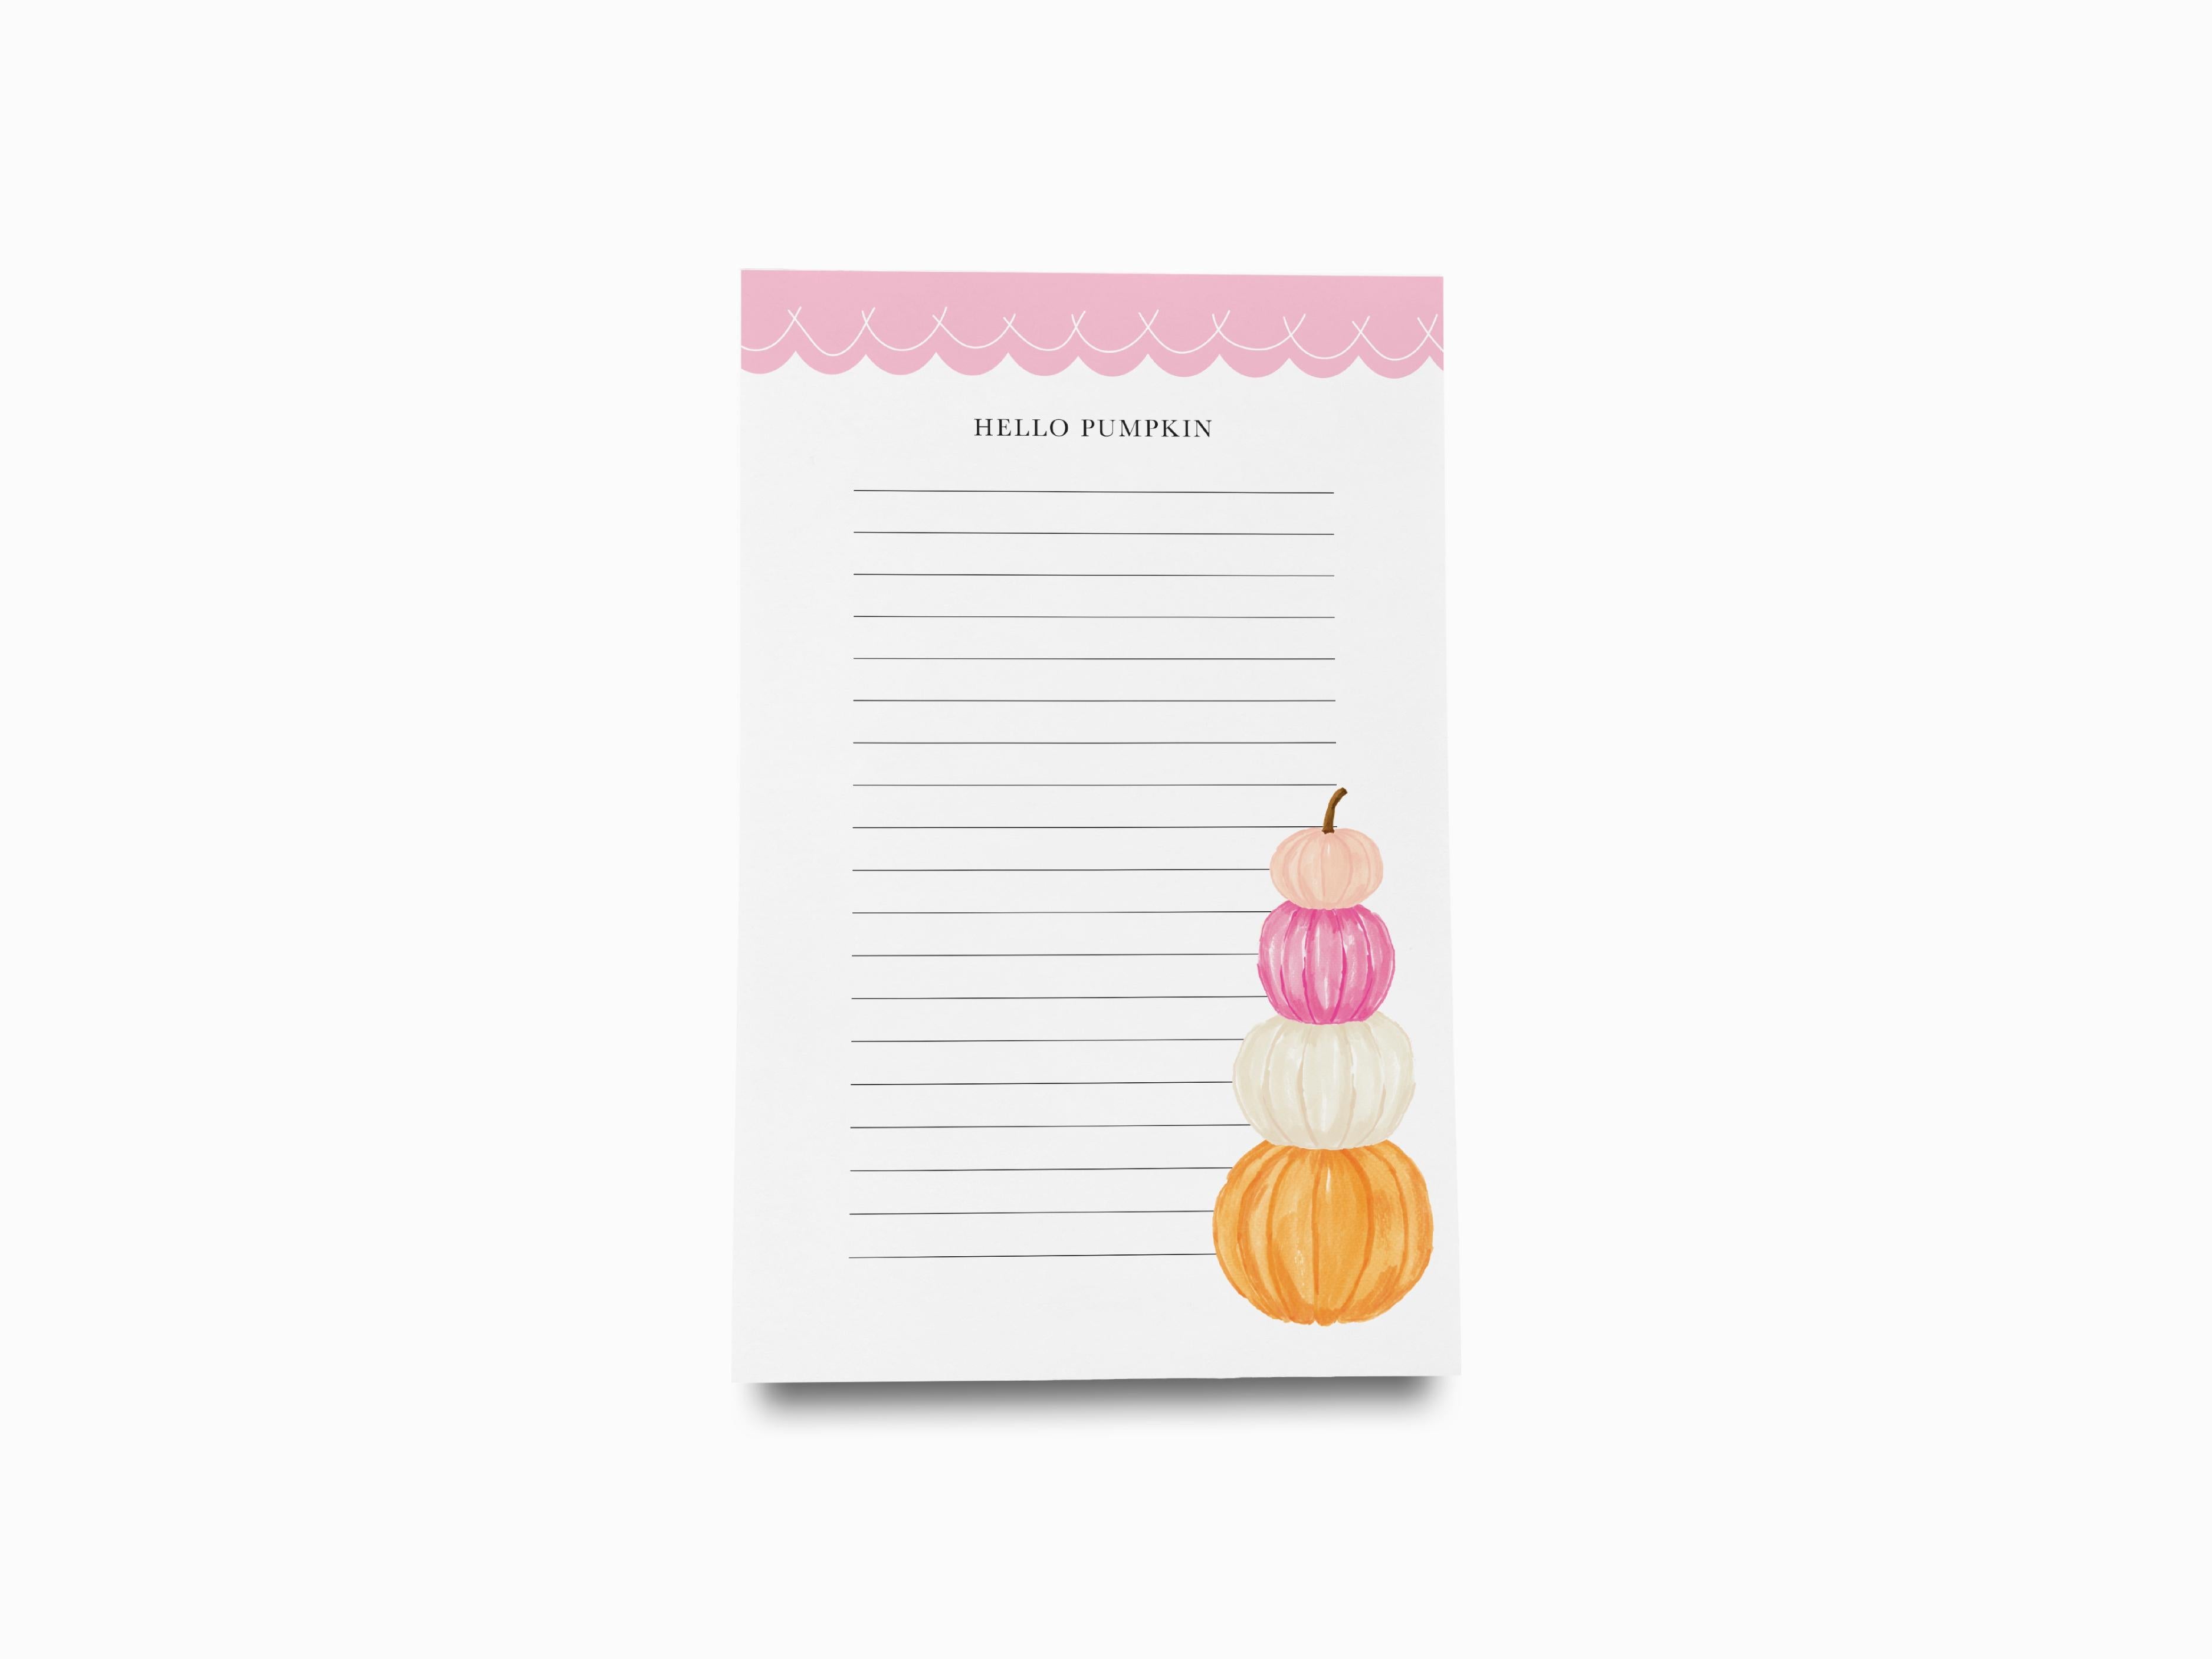 Pumpkin Notepad-These notepads feature our hand-painted watercolor pumpkins, printed in the USA on a beautiful smooth stock. You choose which size you want (or bundled together for a beautiful gift set) and makes a great gift for the checklist and Fall time lover in your life.-The Singing Little Bird